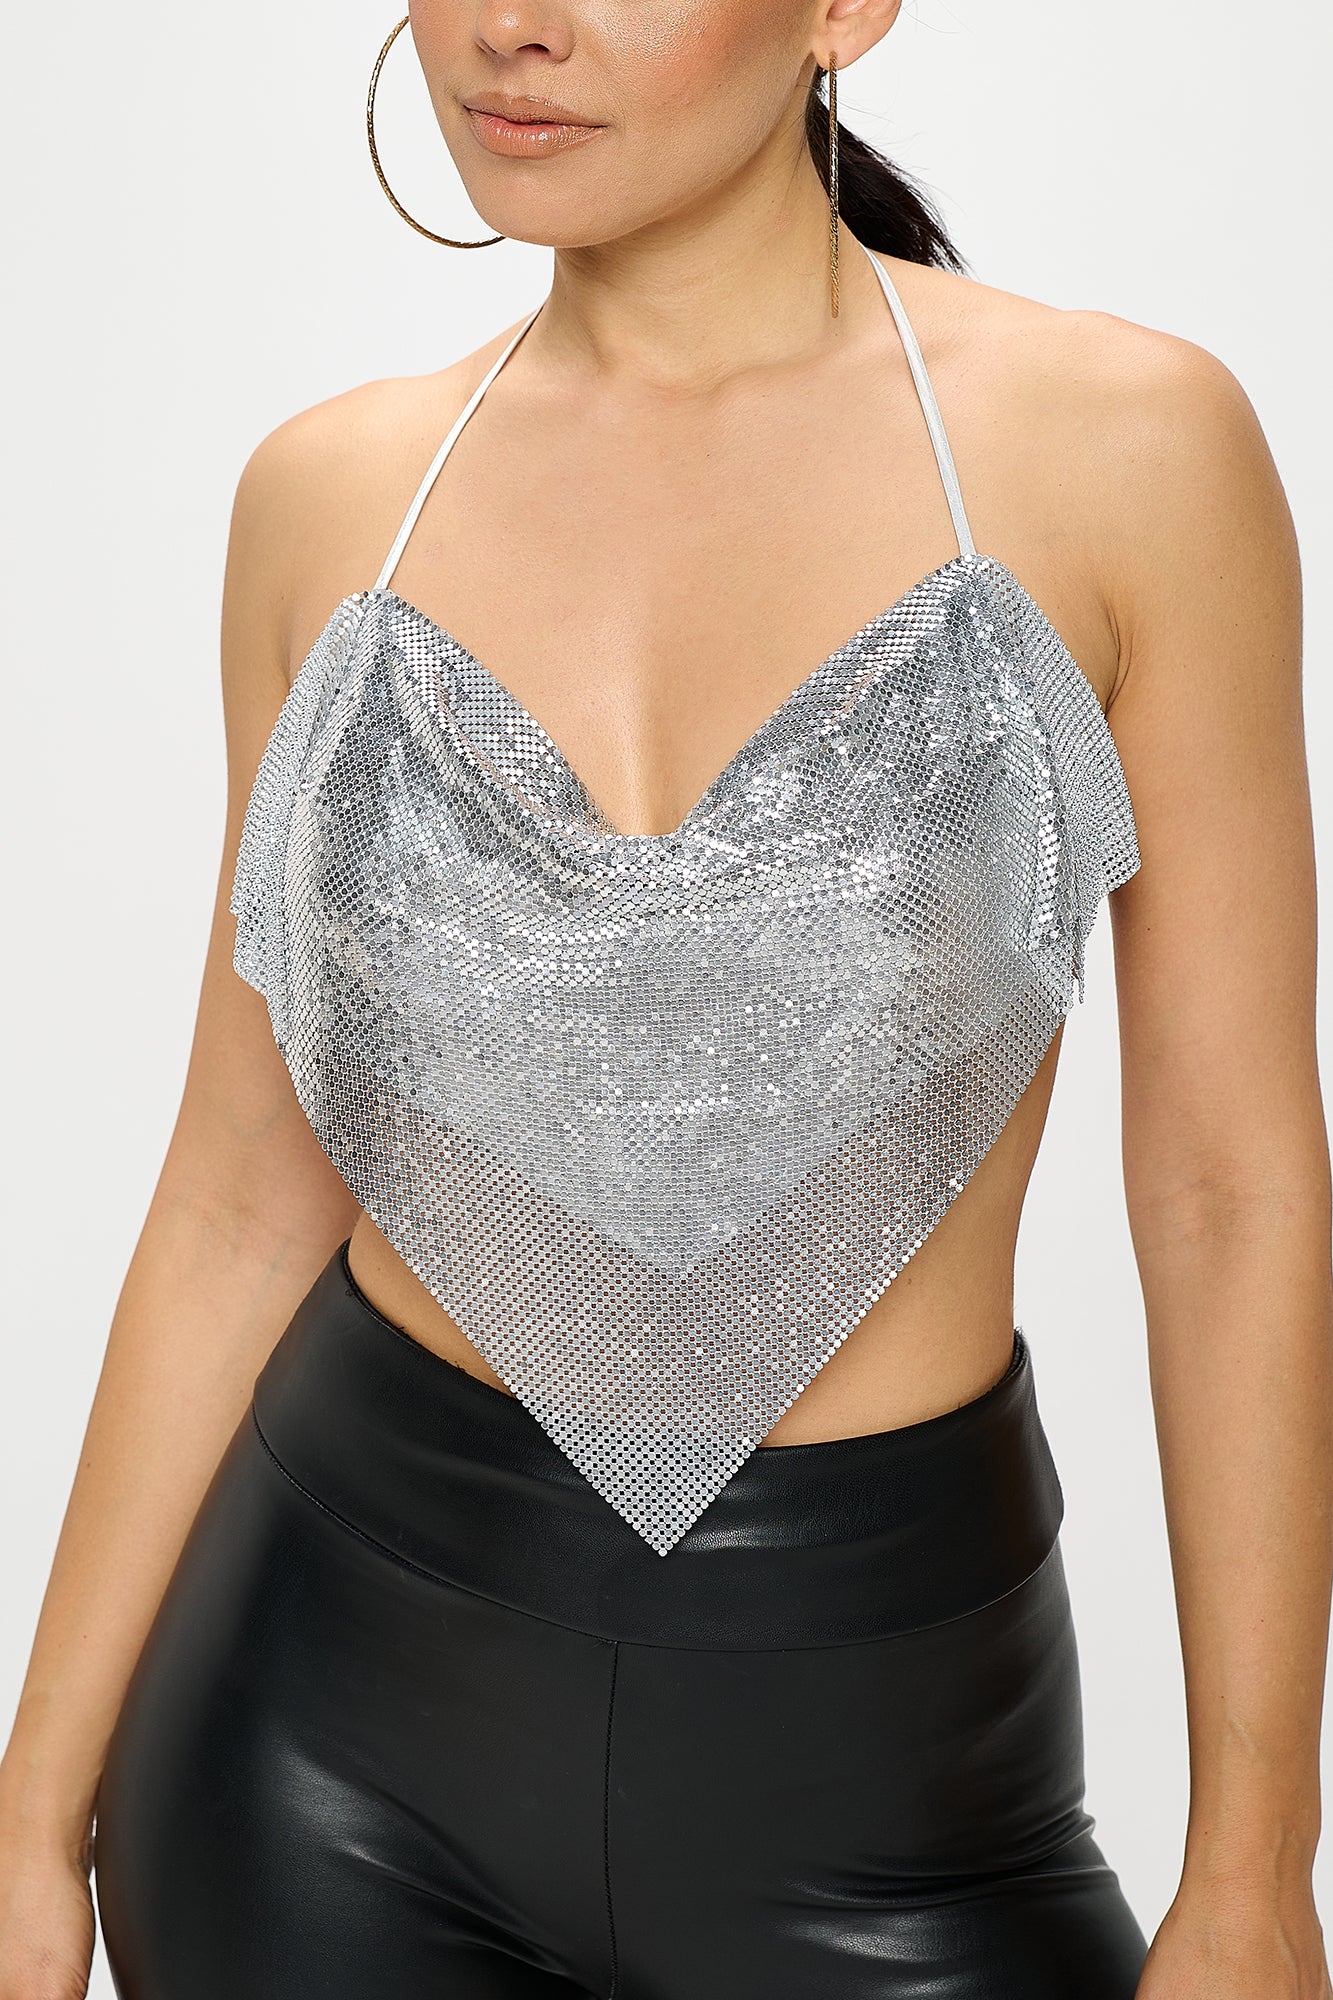 Chainmail tops